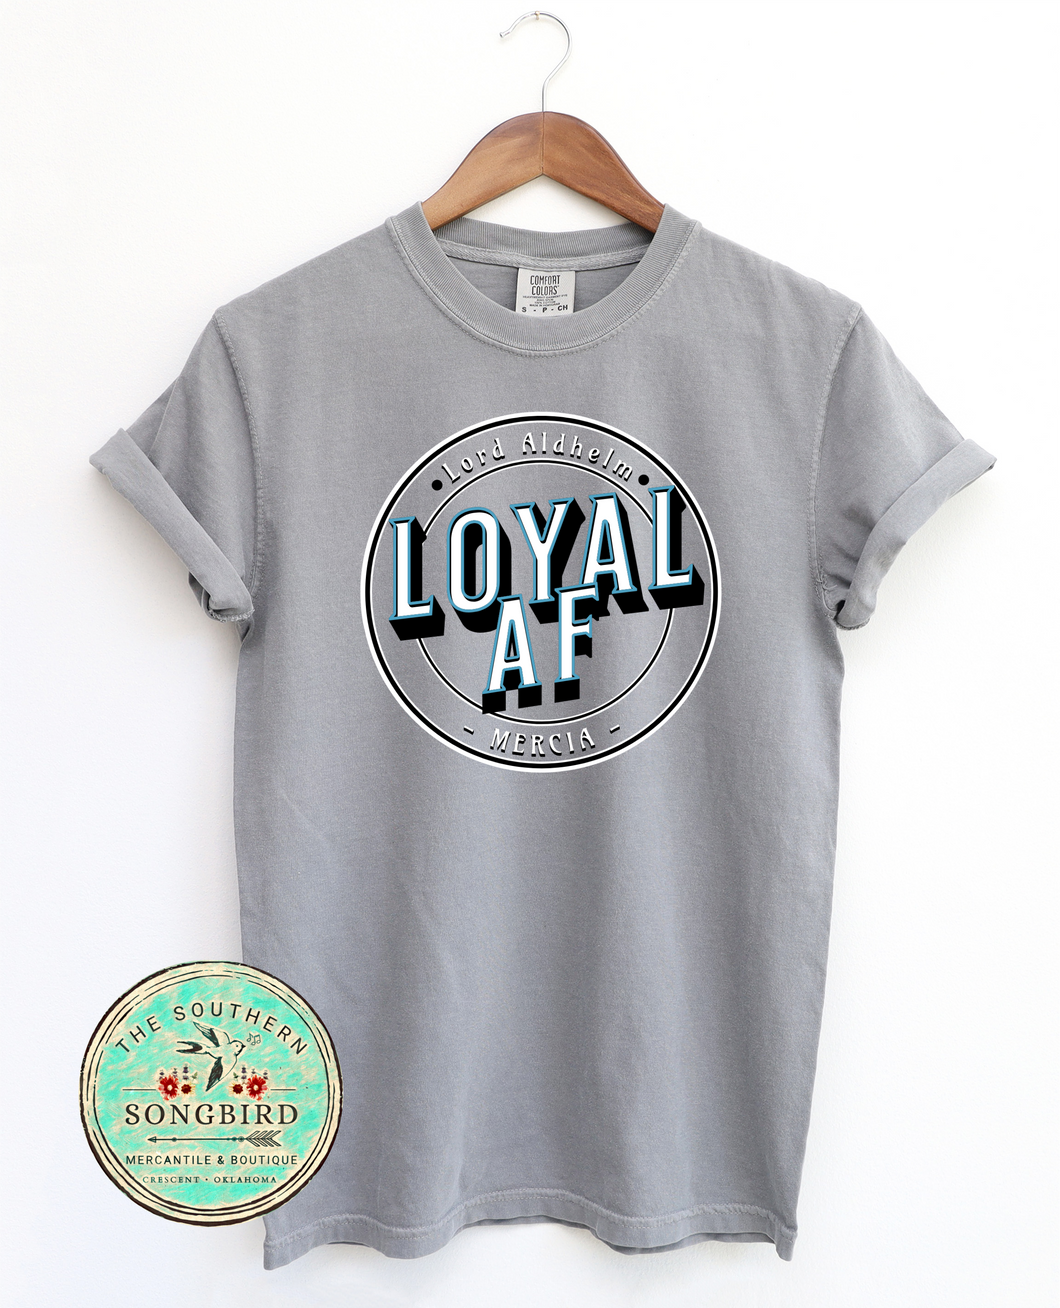 SALE!! Ready To Ship!! Lord Aldhelm - Loyal AF Graphic T-shirt